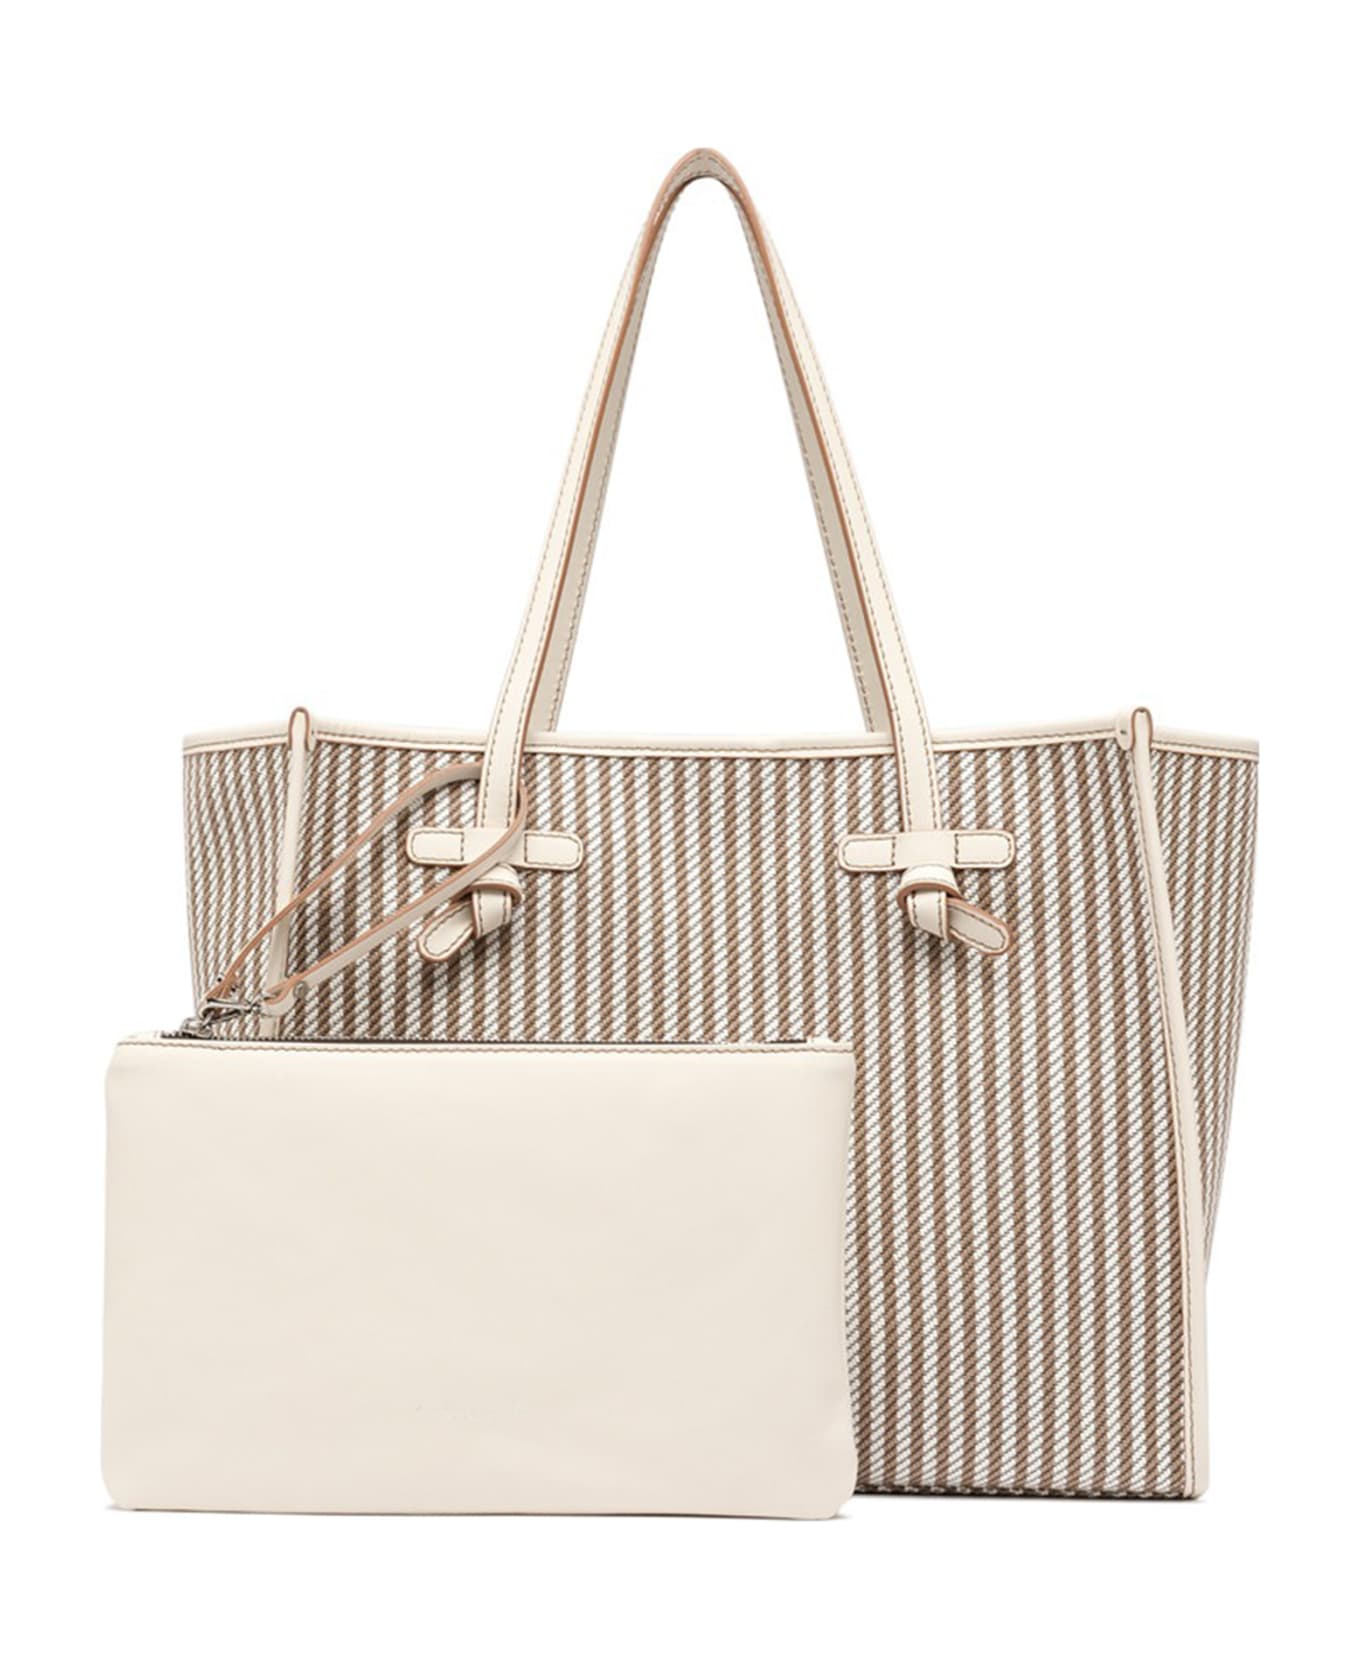 Gianni Chiarini Marcella Shopping Bag With Striped Motif - VAR.MARBLE トートバッグ